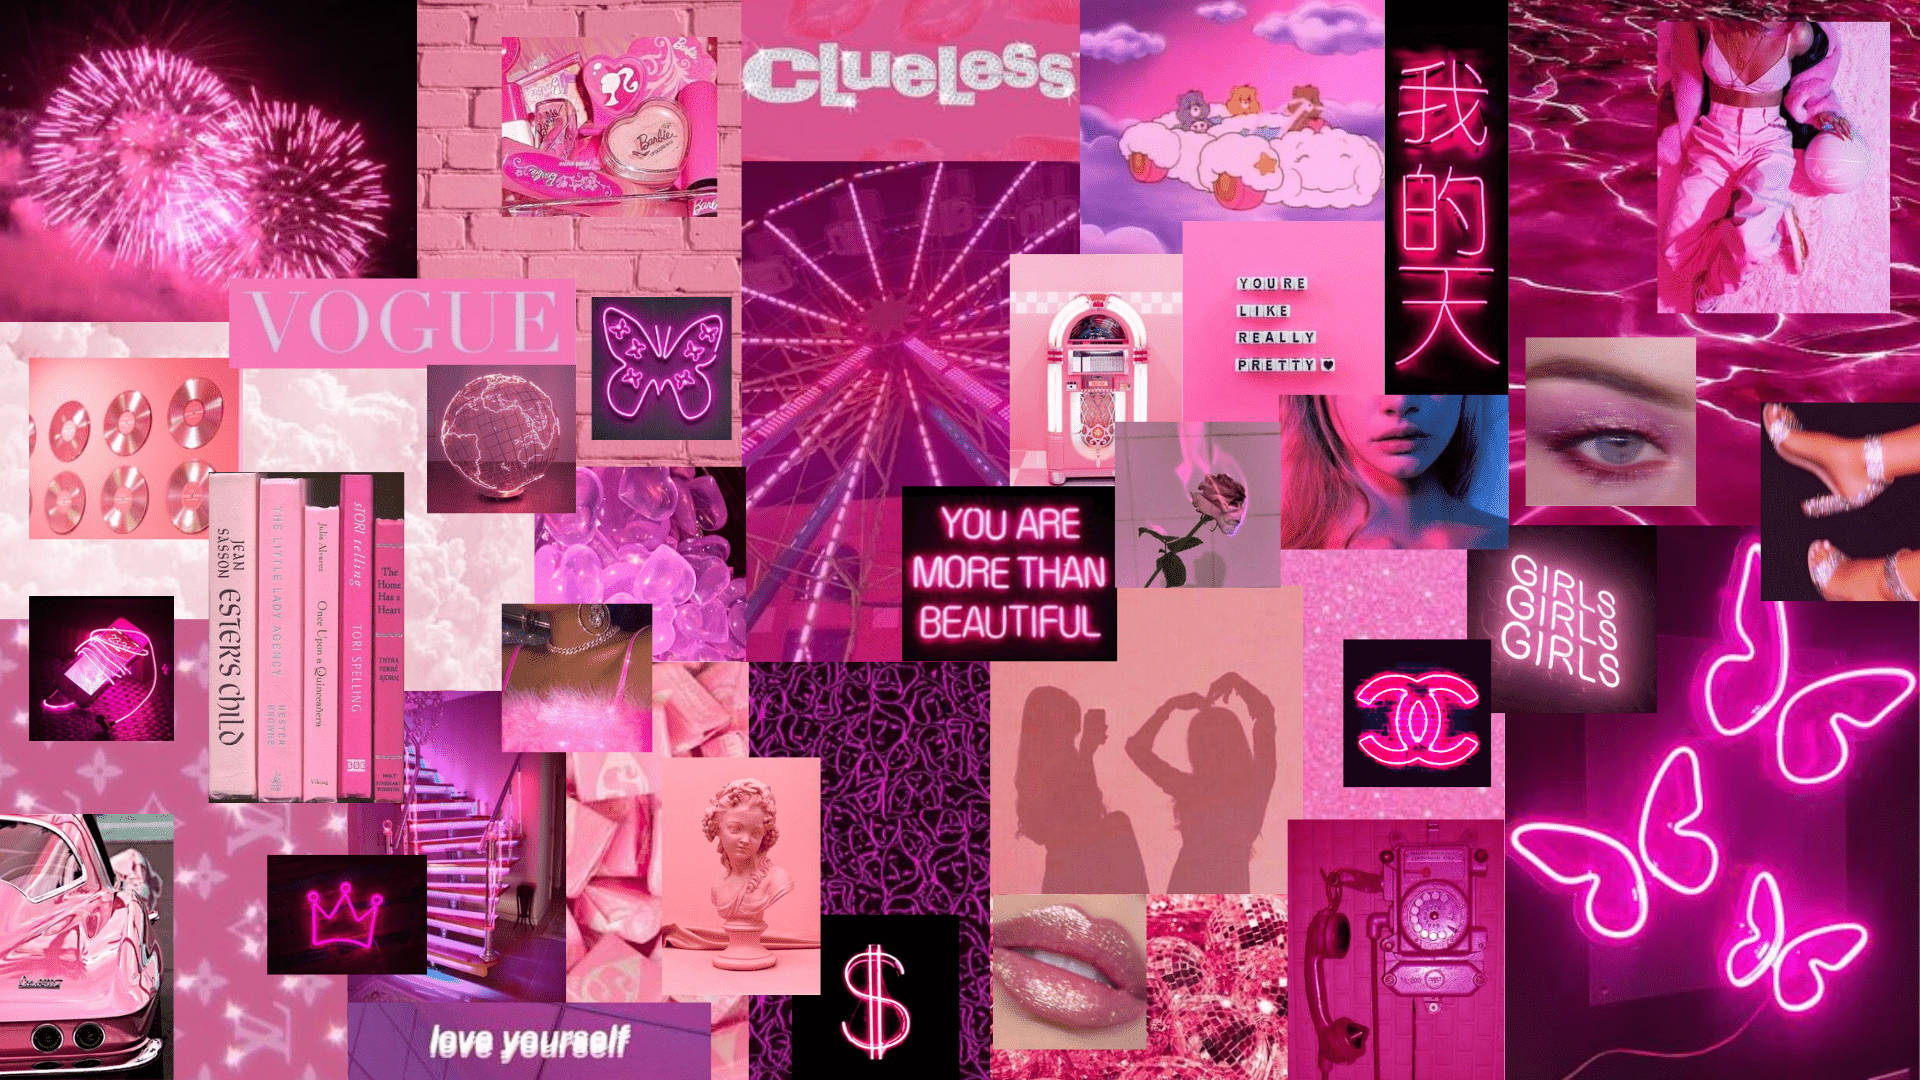 100+] Purple Aesthetic Collage Pictures